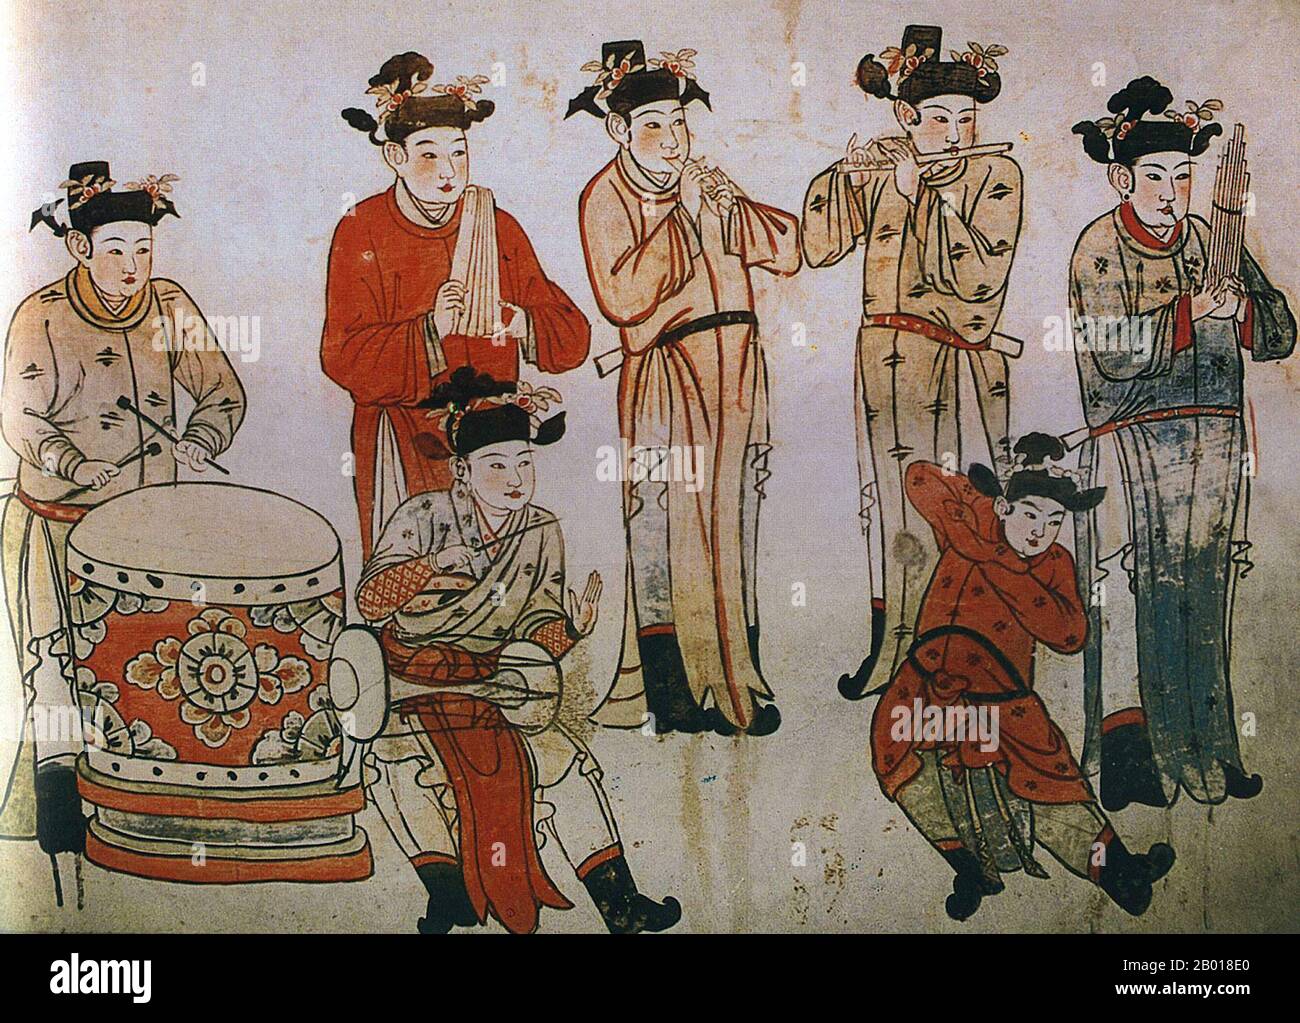 China: Musicians and a dancer. Mural in the tomb of Zhang Wenzao, Xuanhua, Hebei, Liao Dynasty (1093-1117).  The Liao Dynasty, also known as the Khitan Empire, was a state that ruled over the regions of Manchuria, Mongolia, and parts of northern China proper. It was founded by the Yelü clan of the Khitan people in the same year as the Tang Dynasty collapsed (907), even though its first ruler, Yelü Abaoji (Yaruud Ambagai Khan), did not declare an era name until 916. Stock Photo